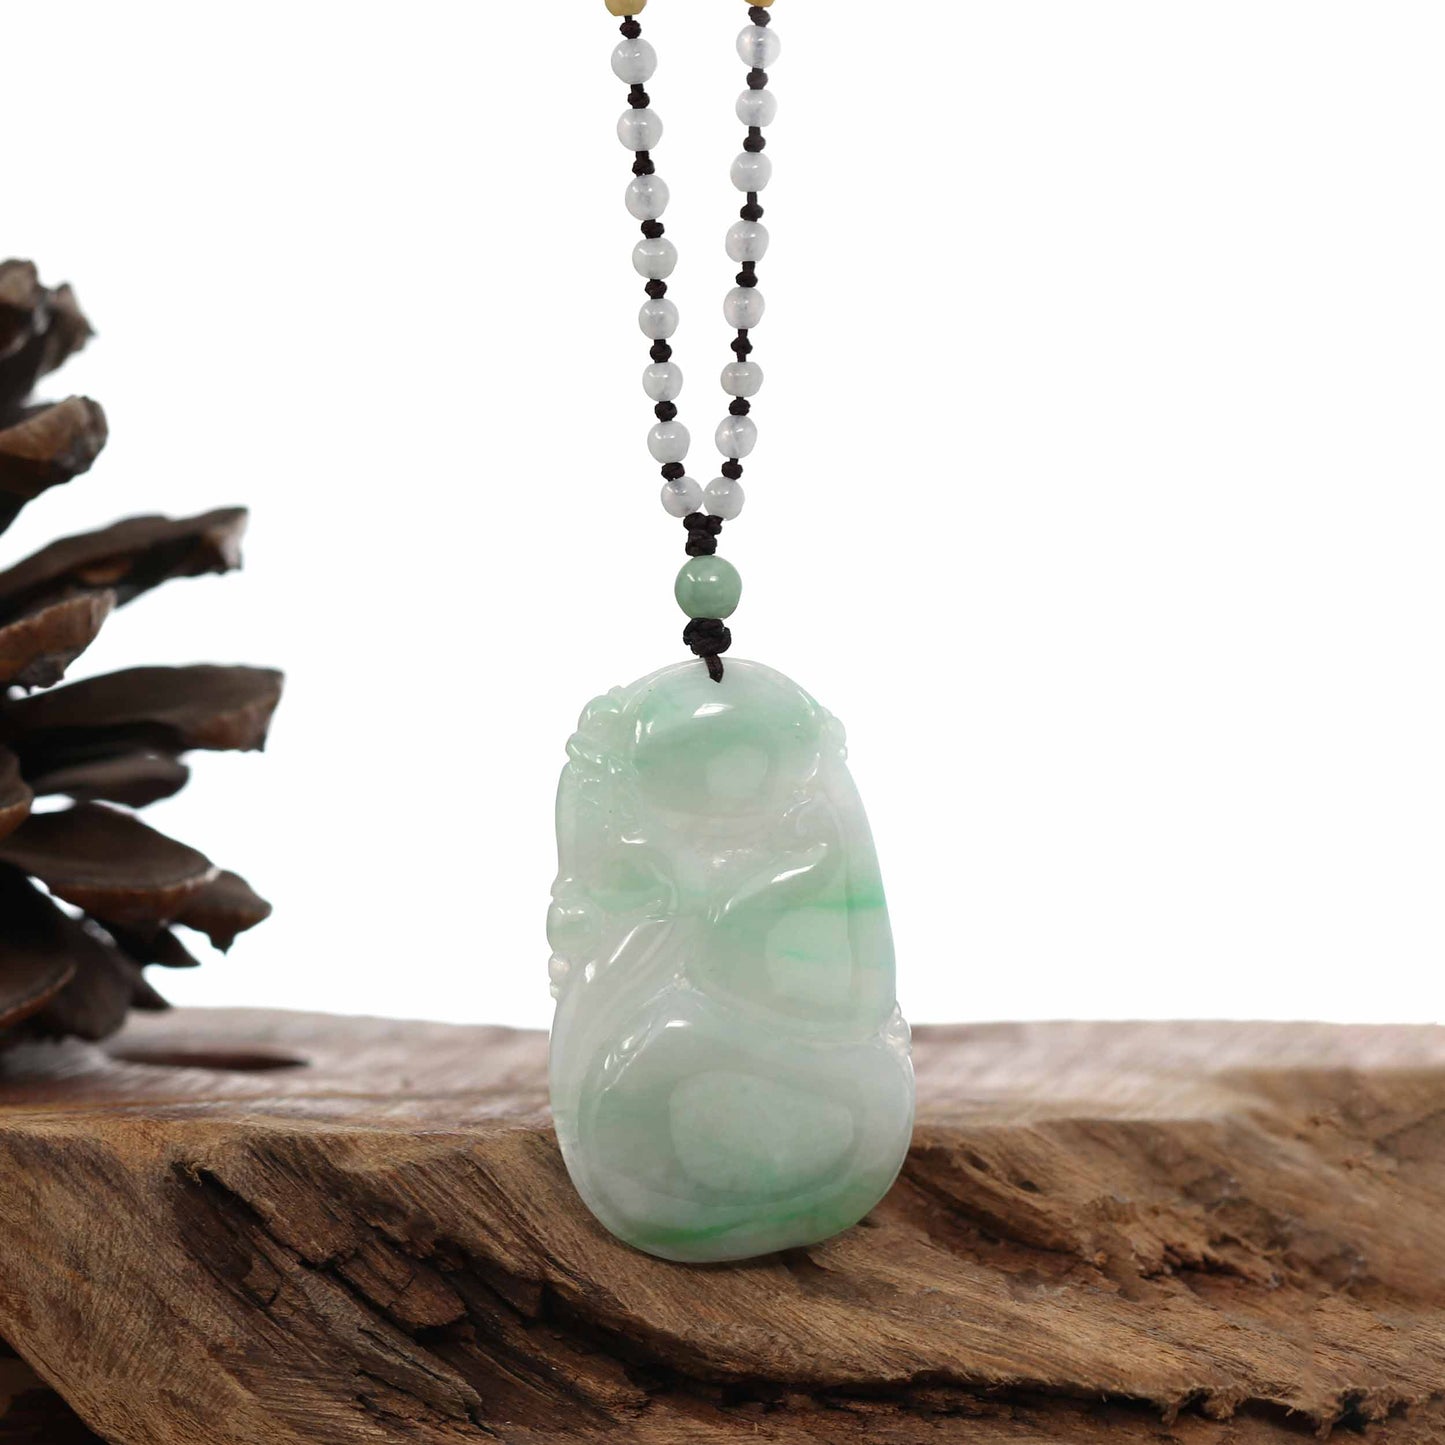 Genuine Green Jadeite Jade "Good Luck HuLu with Dragon" Pendant Necklace With Real Jadeite Bead Necklace